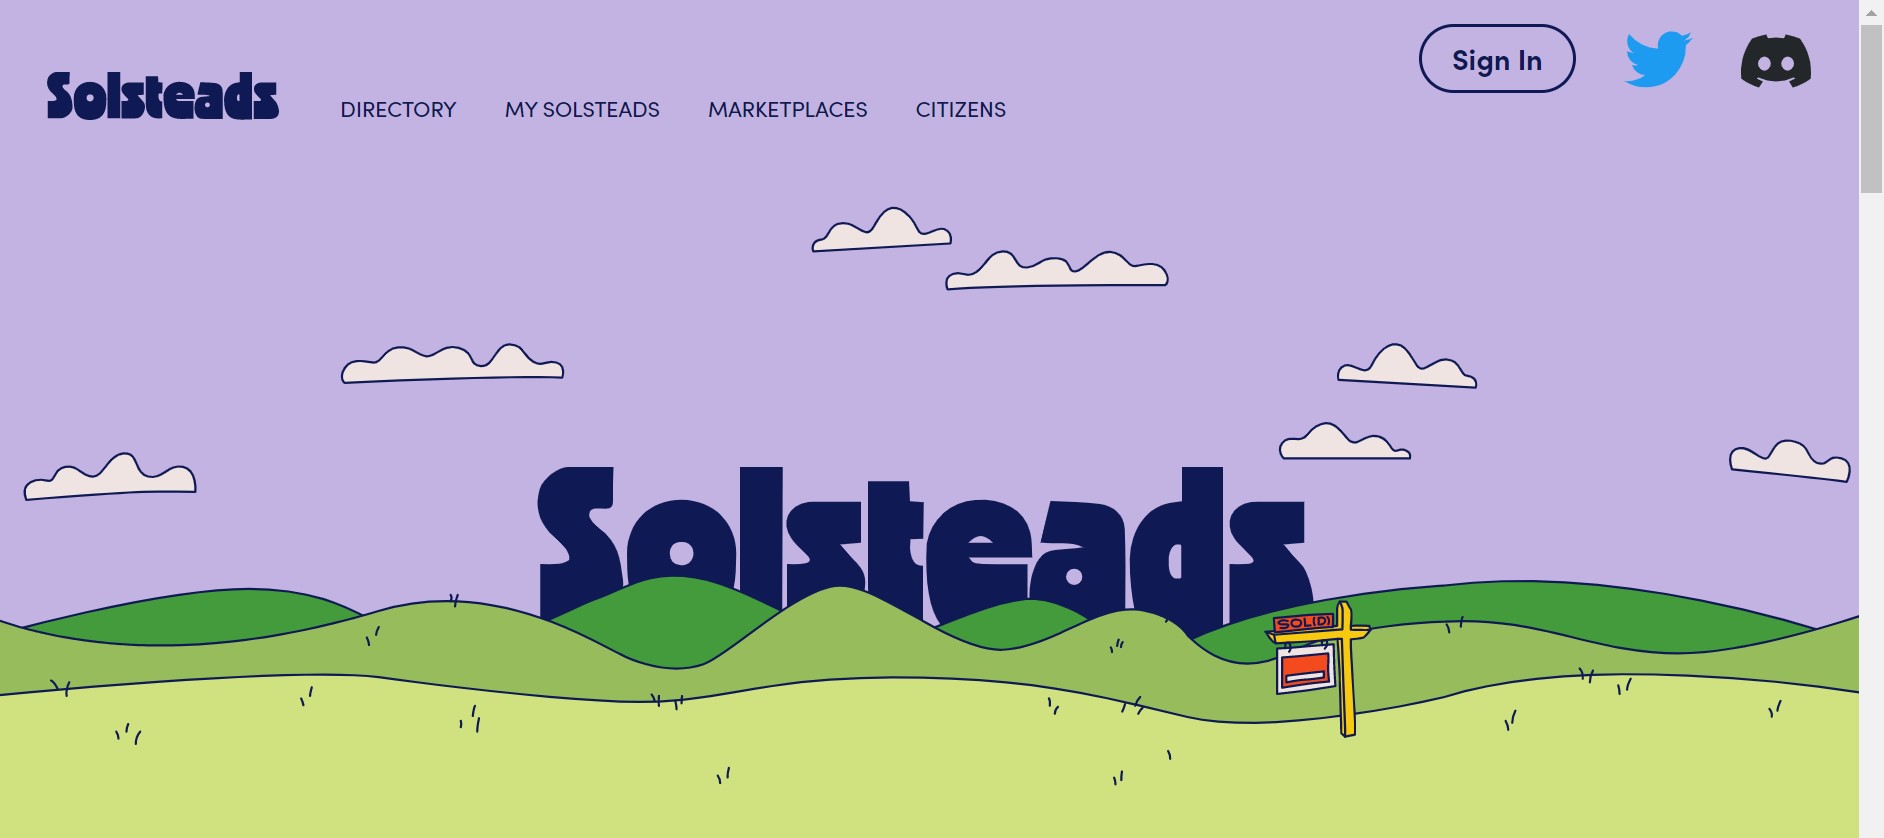 Solsteads